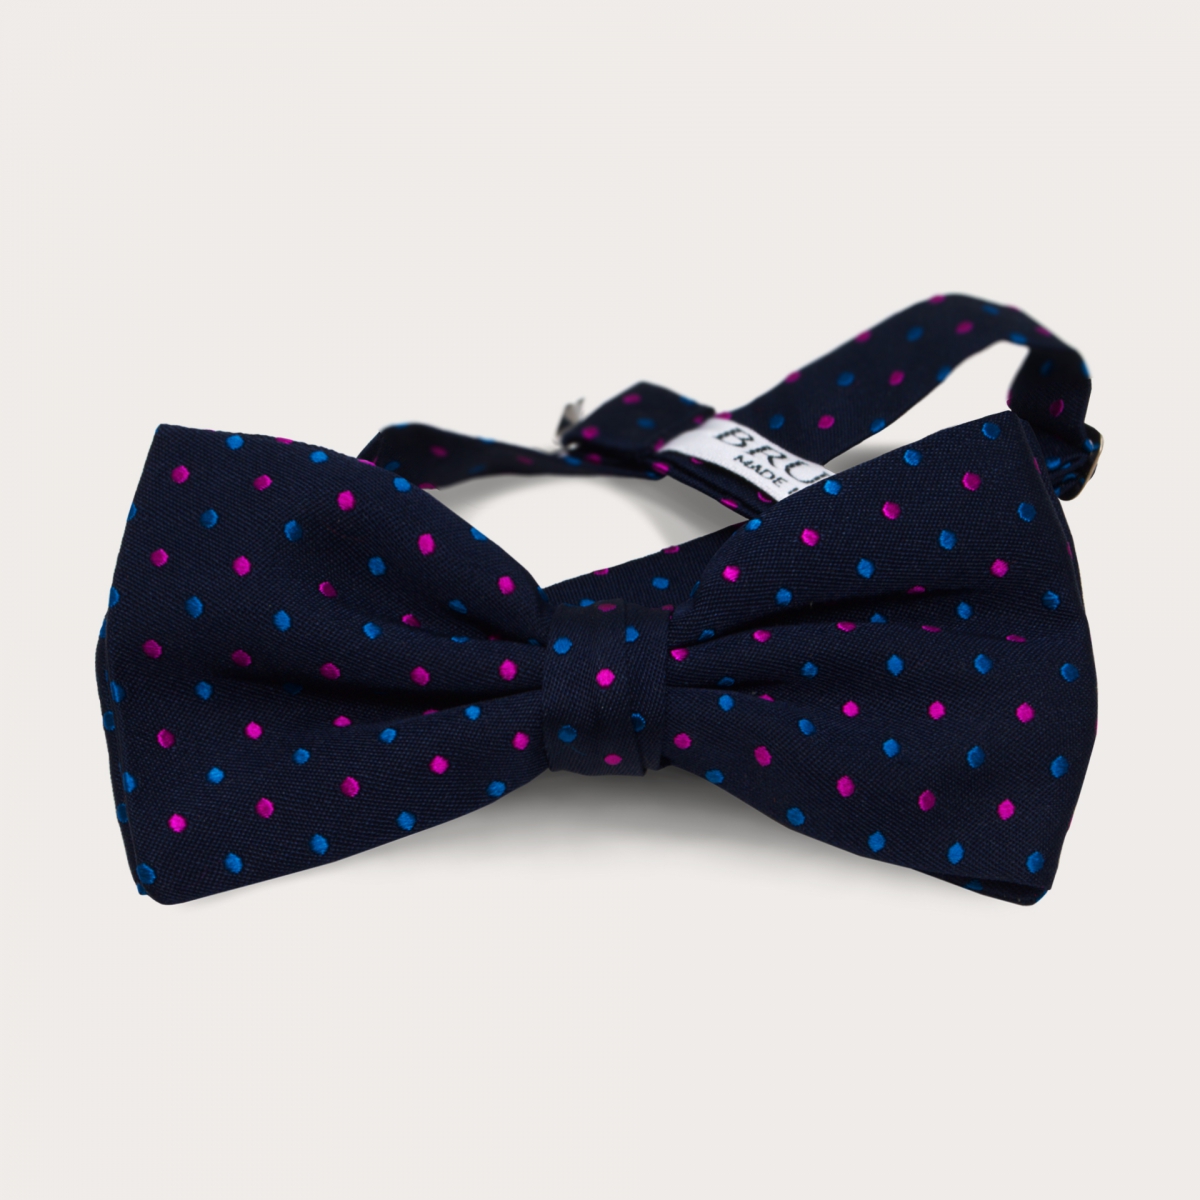 BRUCLE Silk pre-tied bow tie, blue dotted pattern